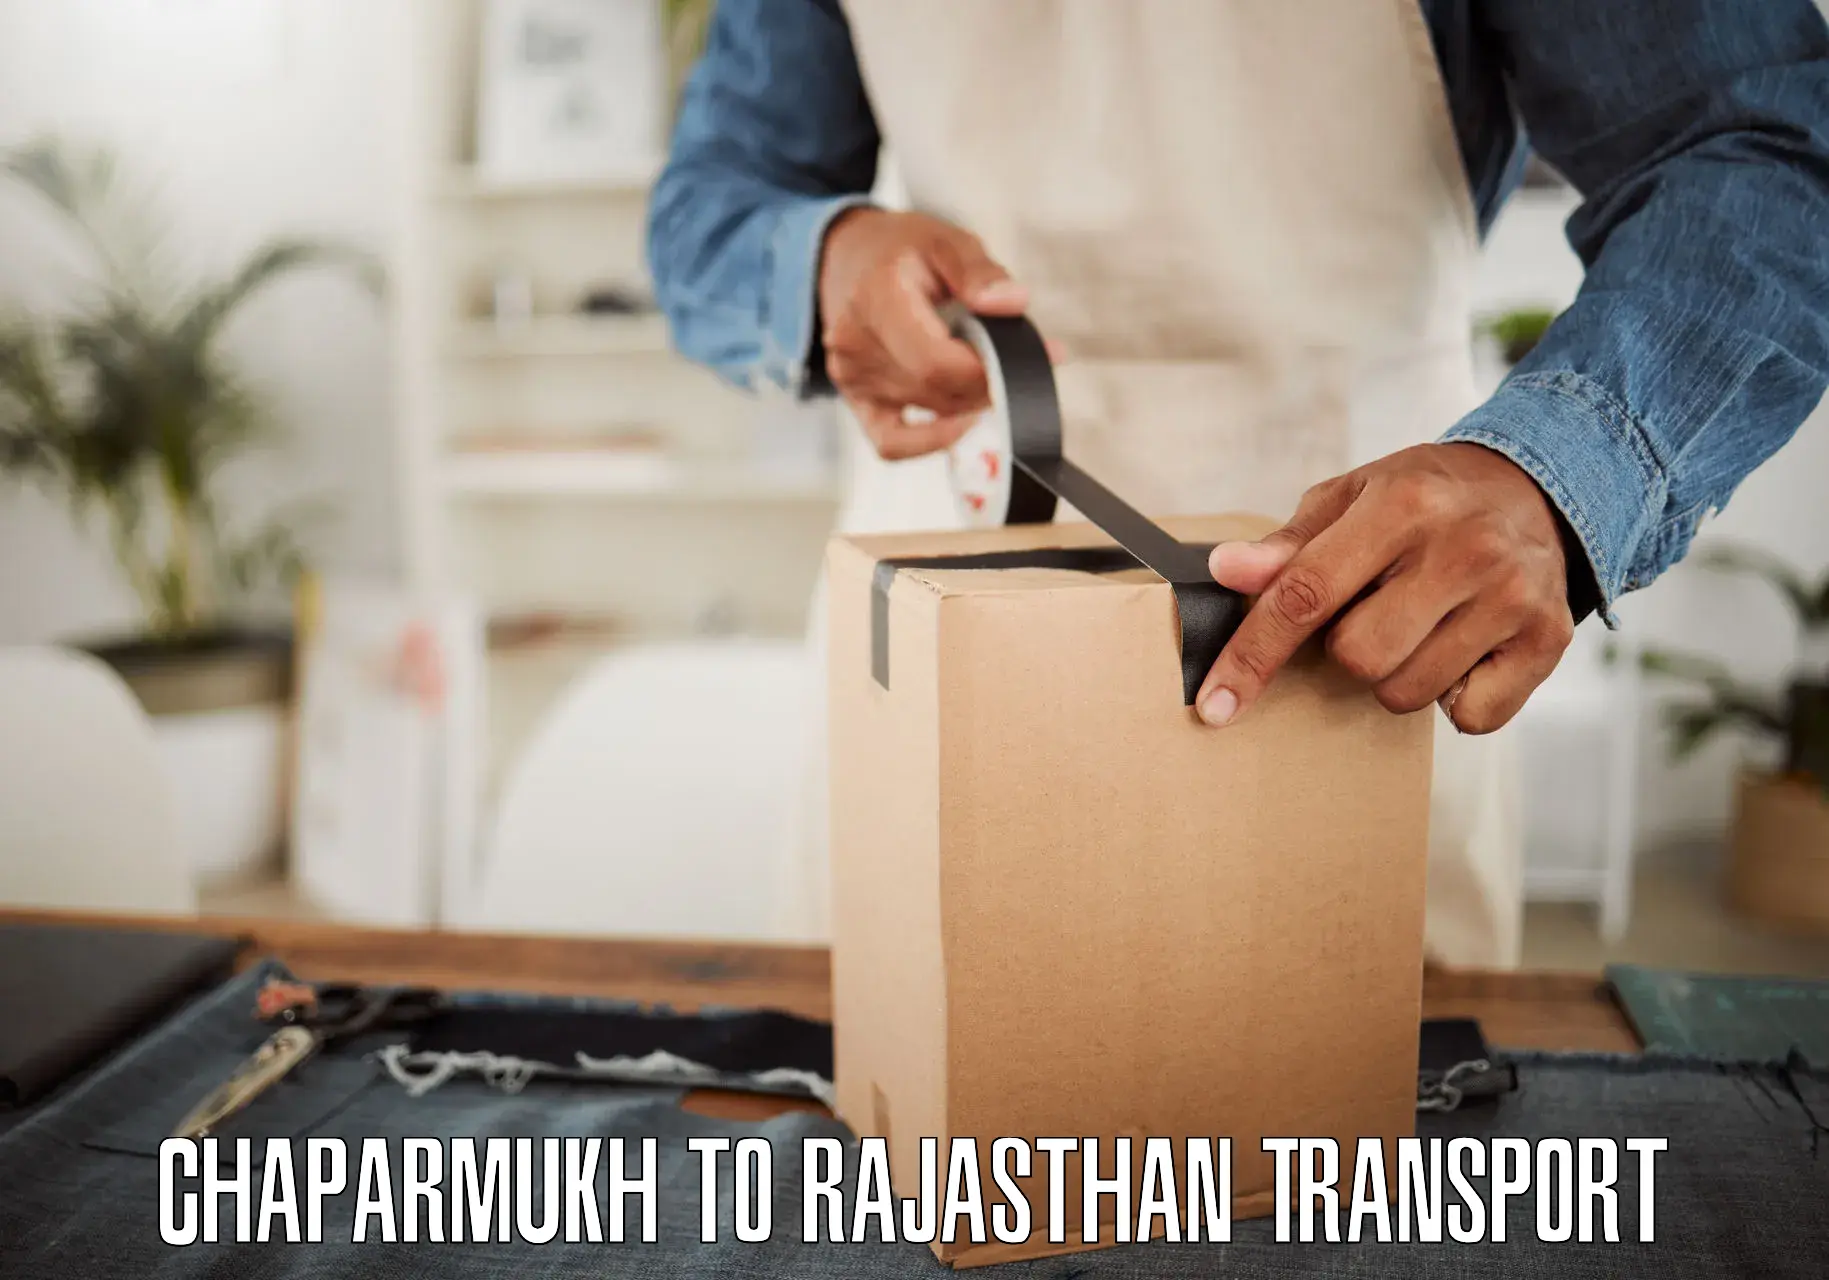 Container transportation services Chaparmukh to Fatehpur Sikar